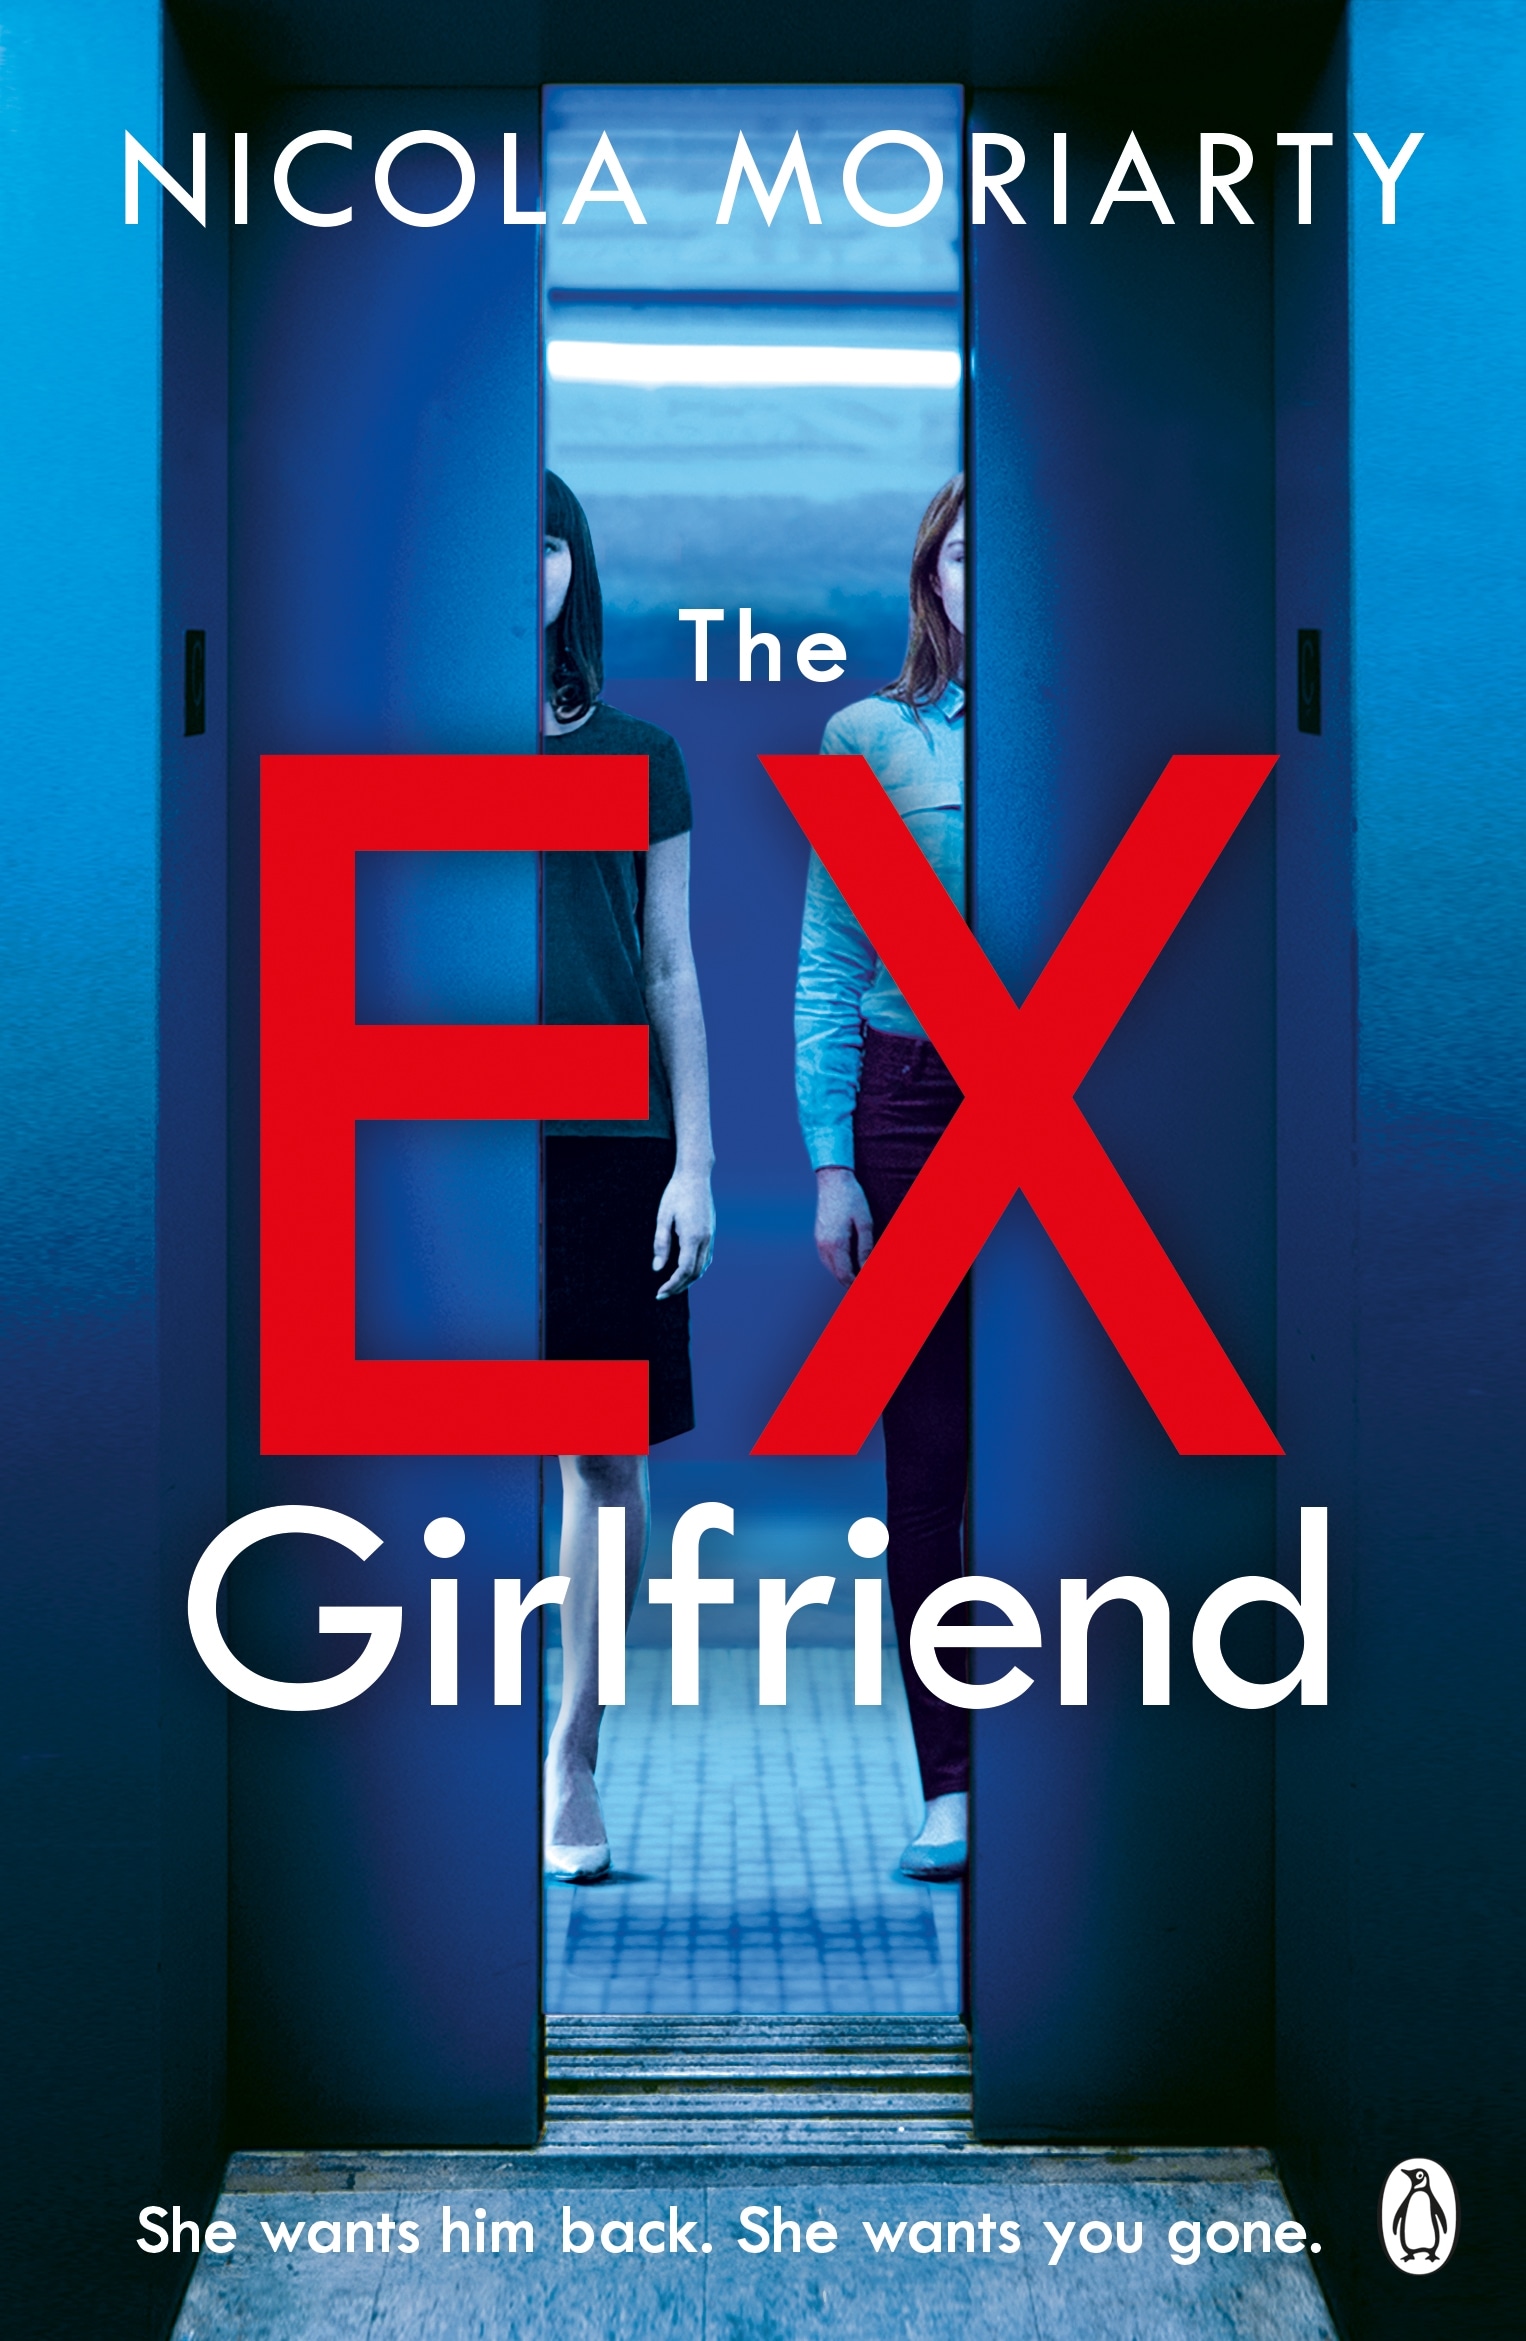 Book “The Ex-Girlfriend” by Nicola Moriarty — October 31, 2019